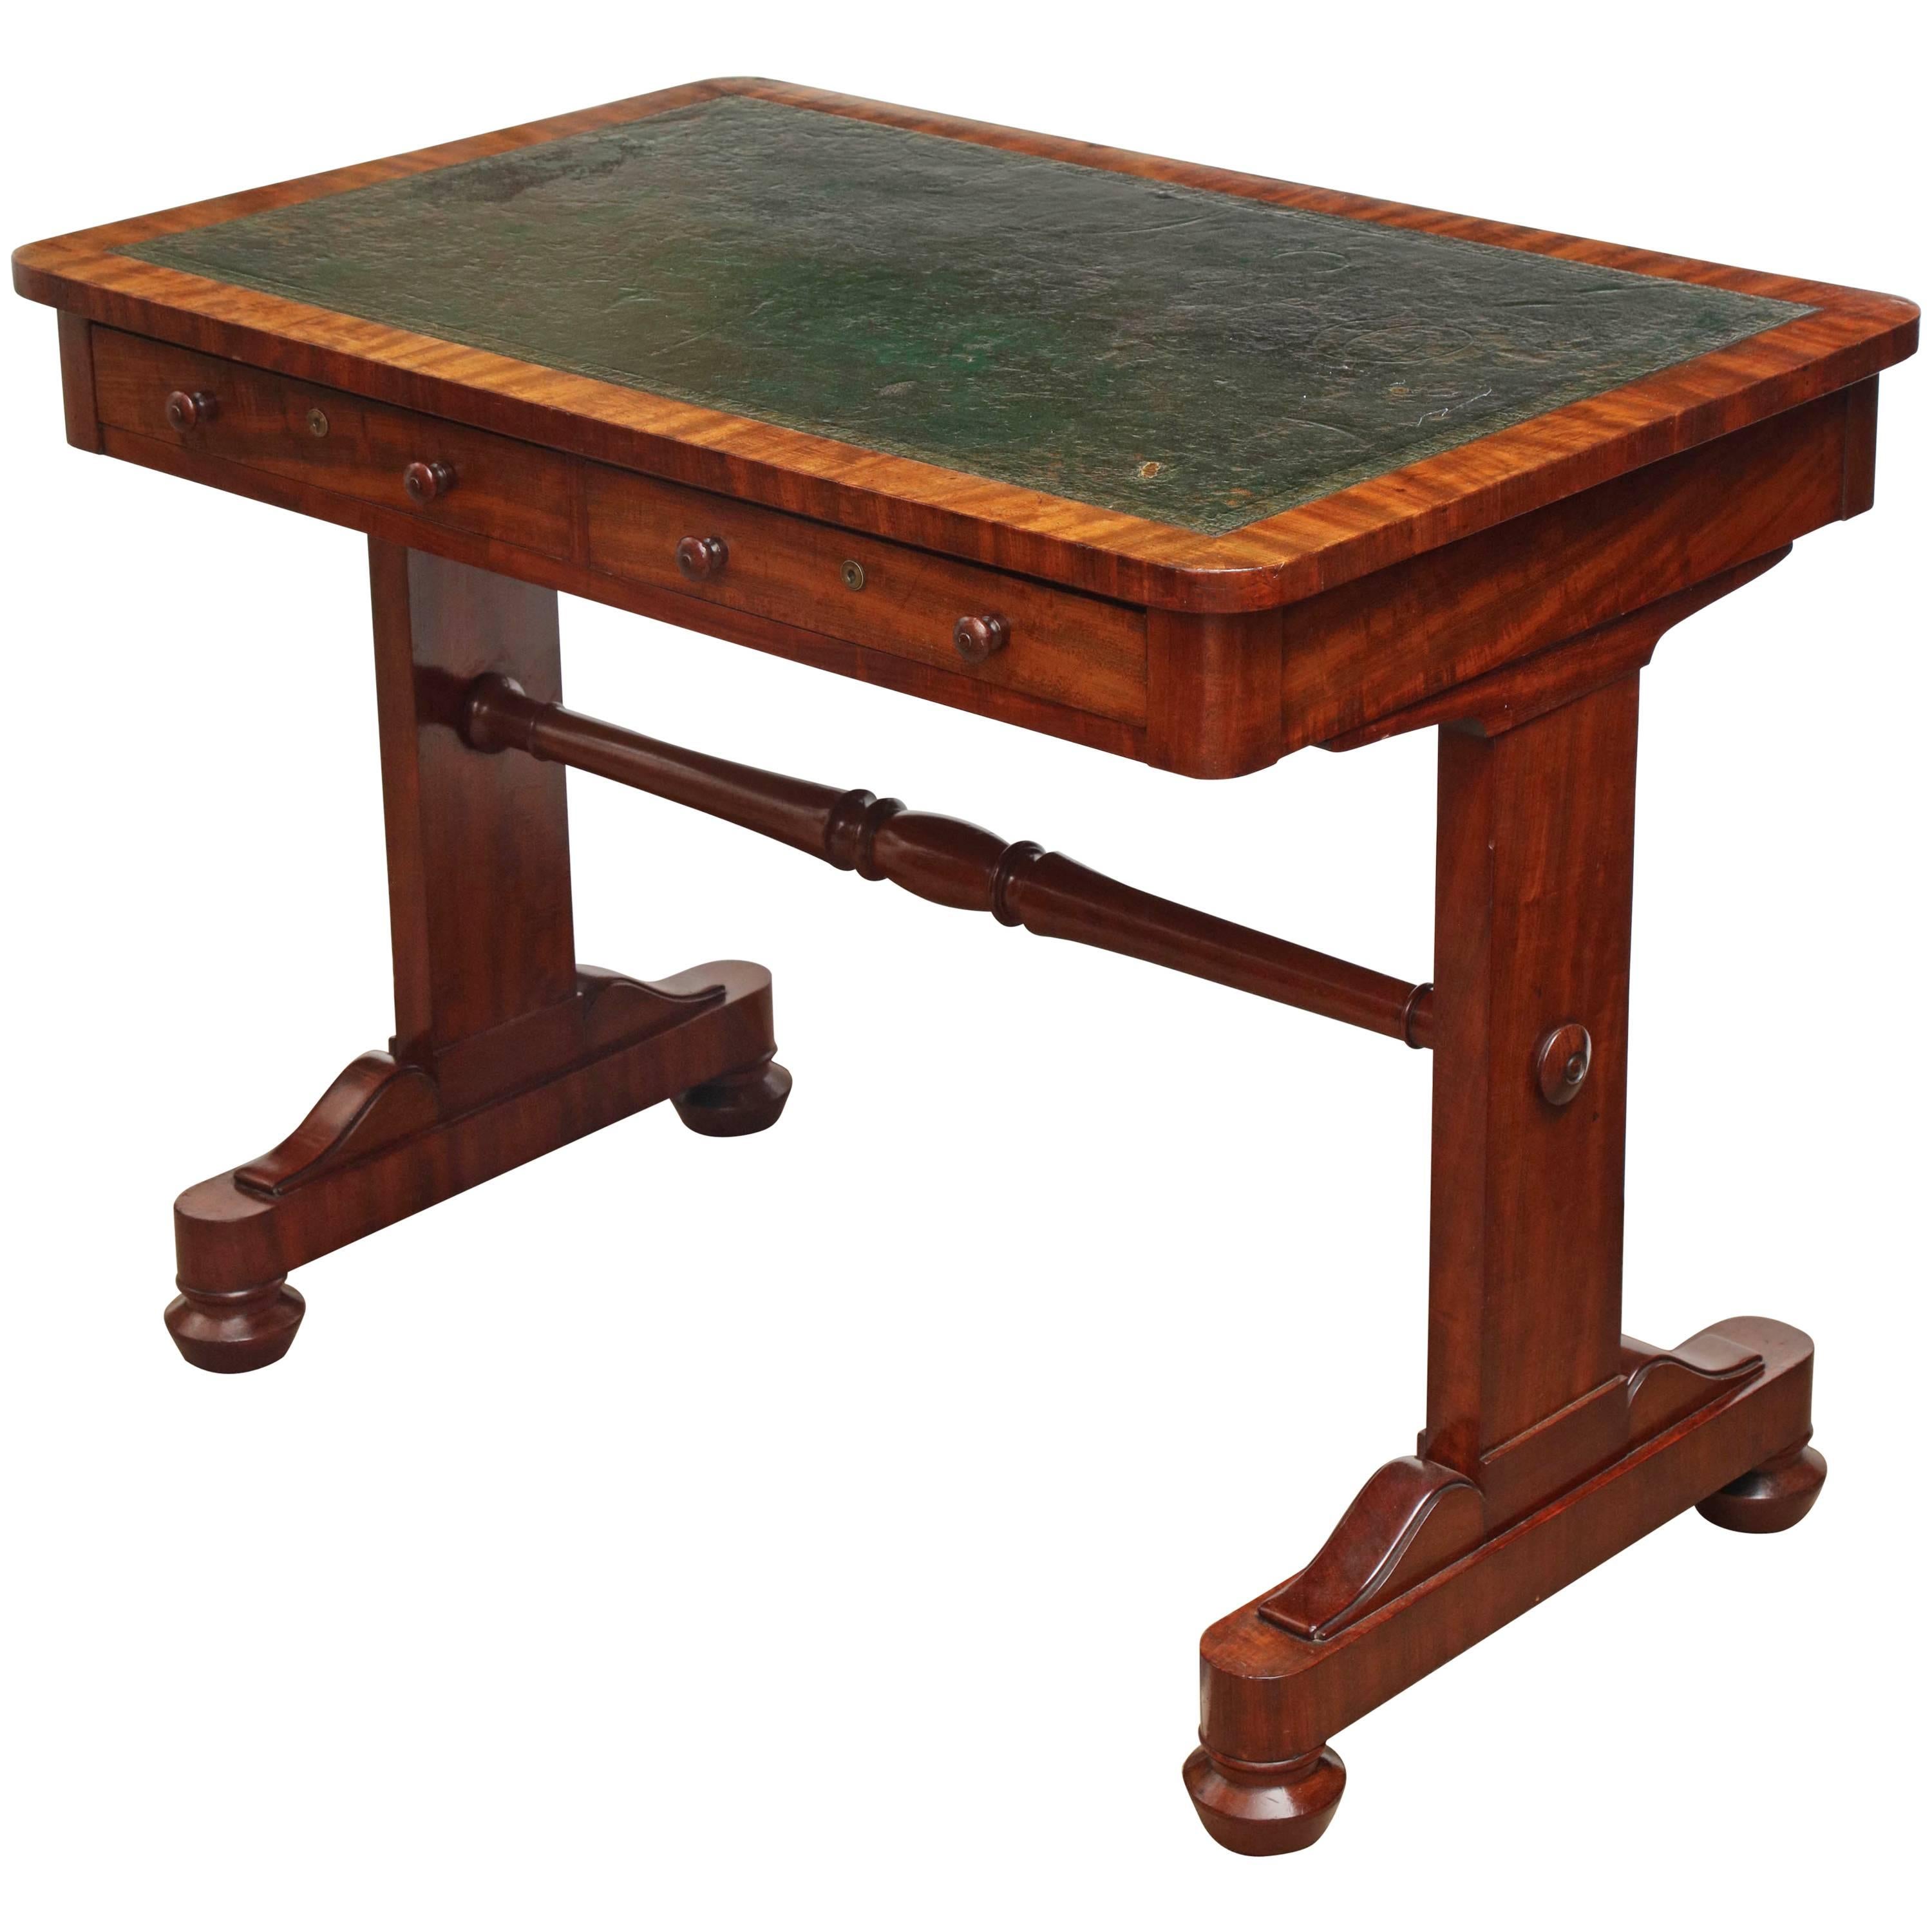 Early 19th Century English, Mahogany and Leather Top Desk by Gillows & Co